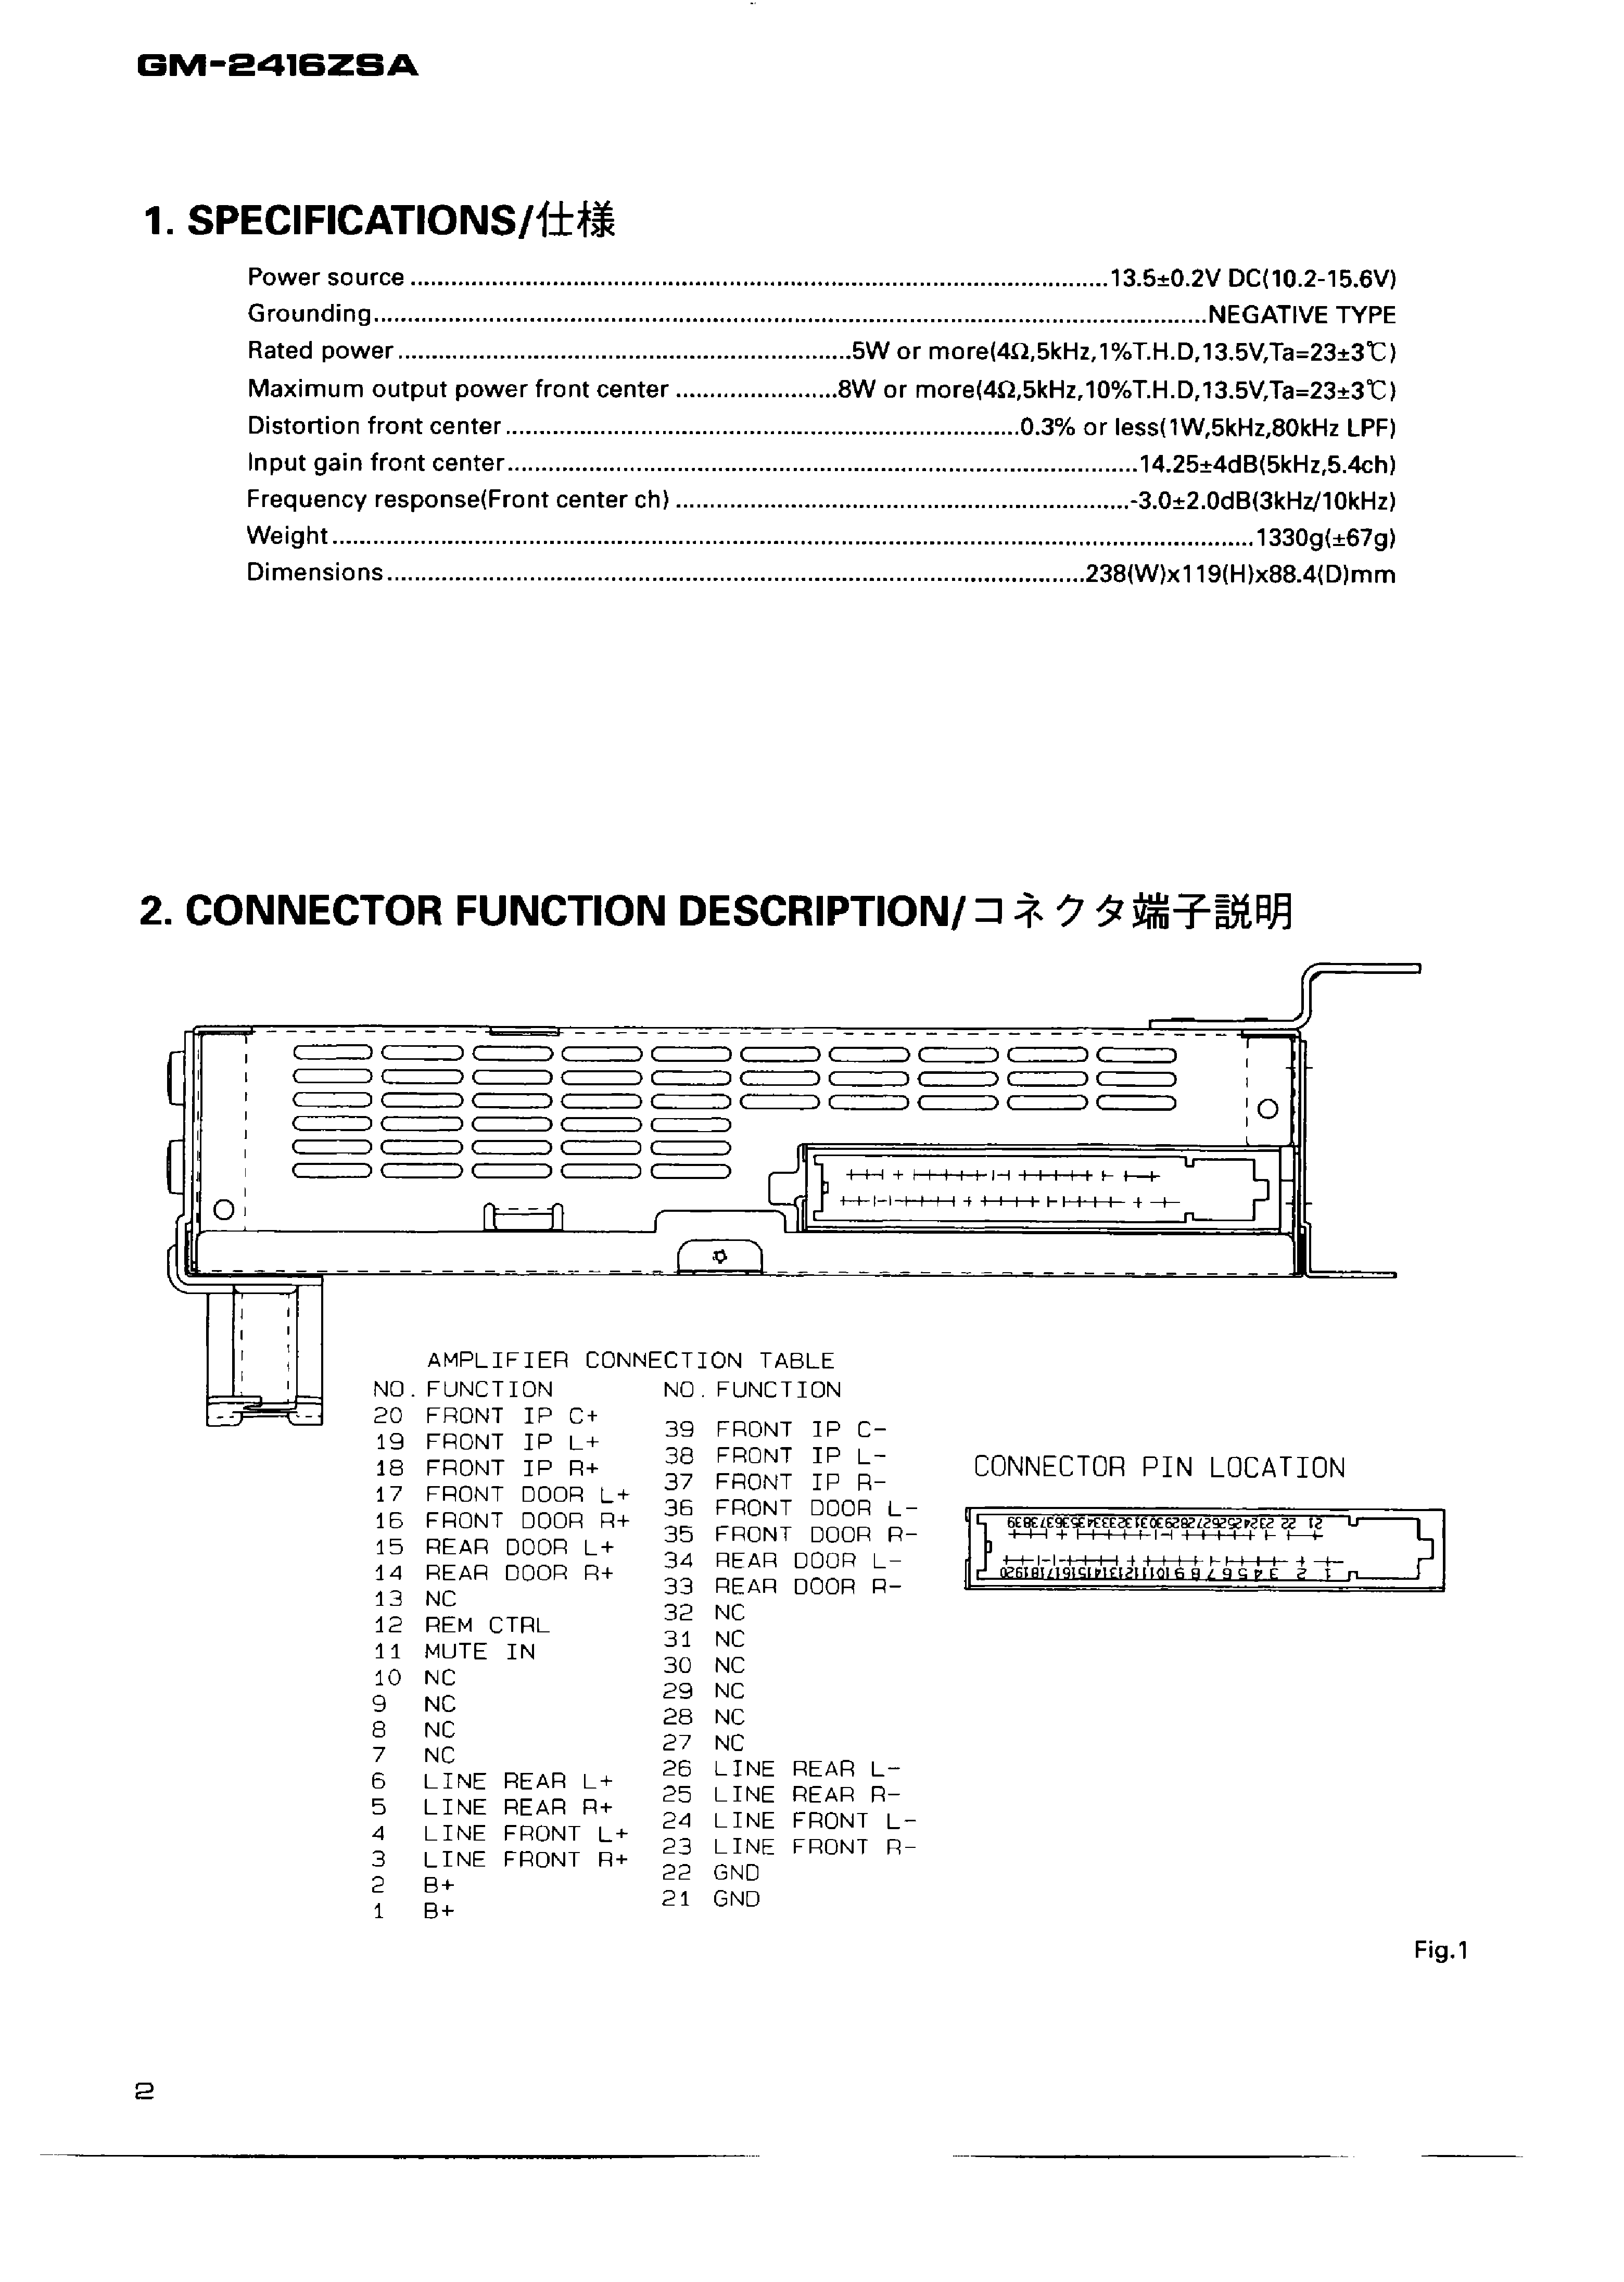 PIONEER GM-2416ZSA SM service manual (2nd page)